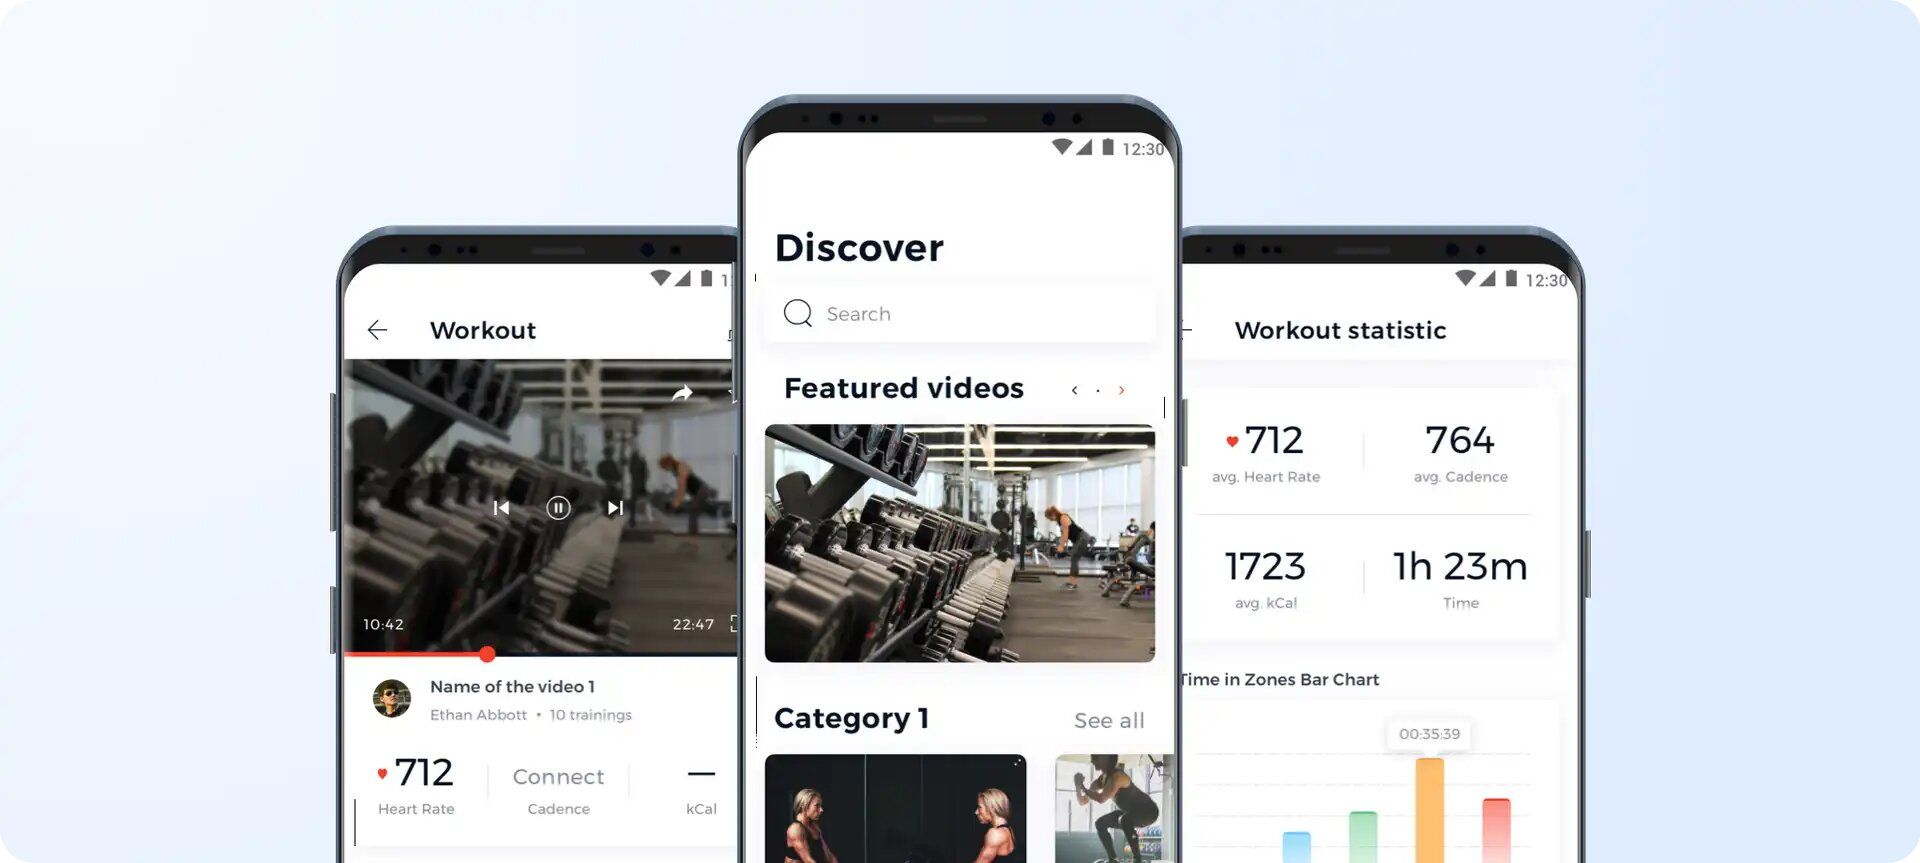 Platoon Fit is an amazing example of how mobile fitness applications can use IoT technologies to improve their services